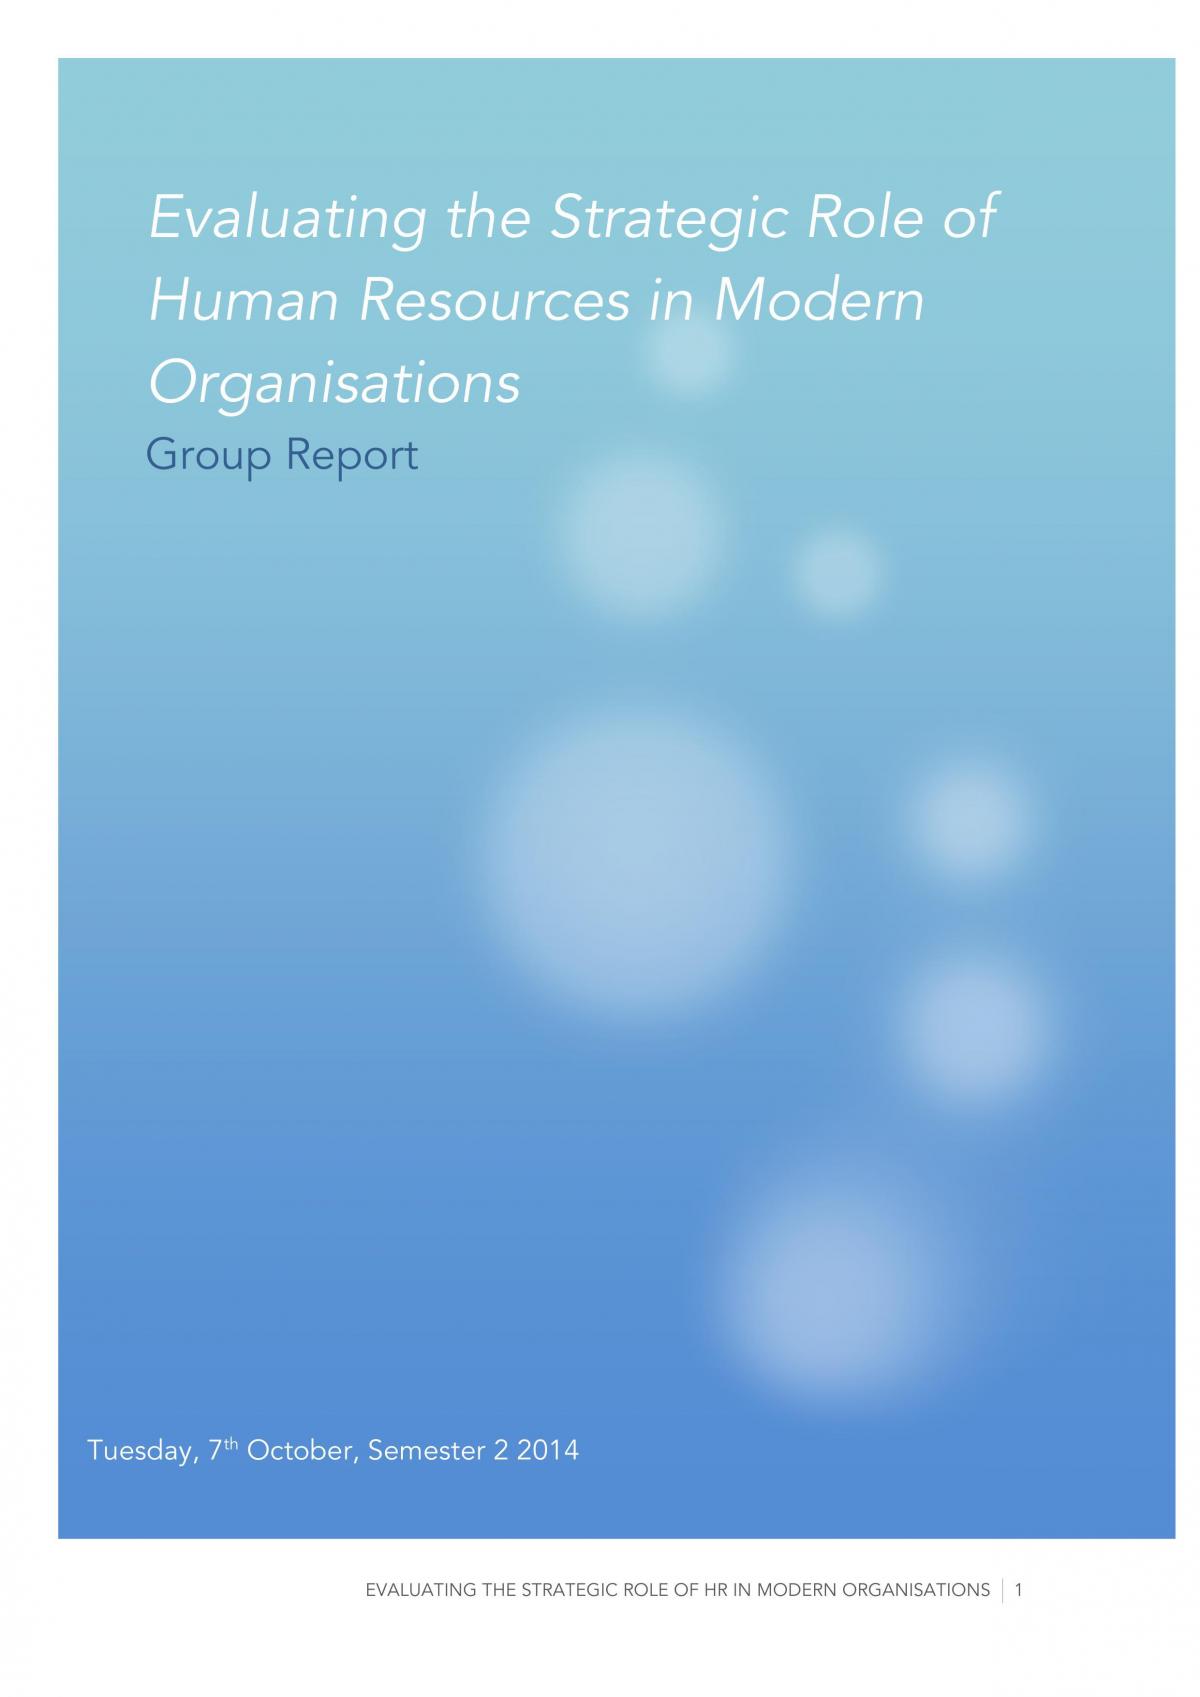 Group Report - Evaluating the strategic role of HRM in modern organisations - Page 1